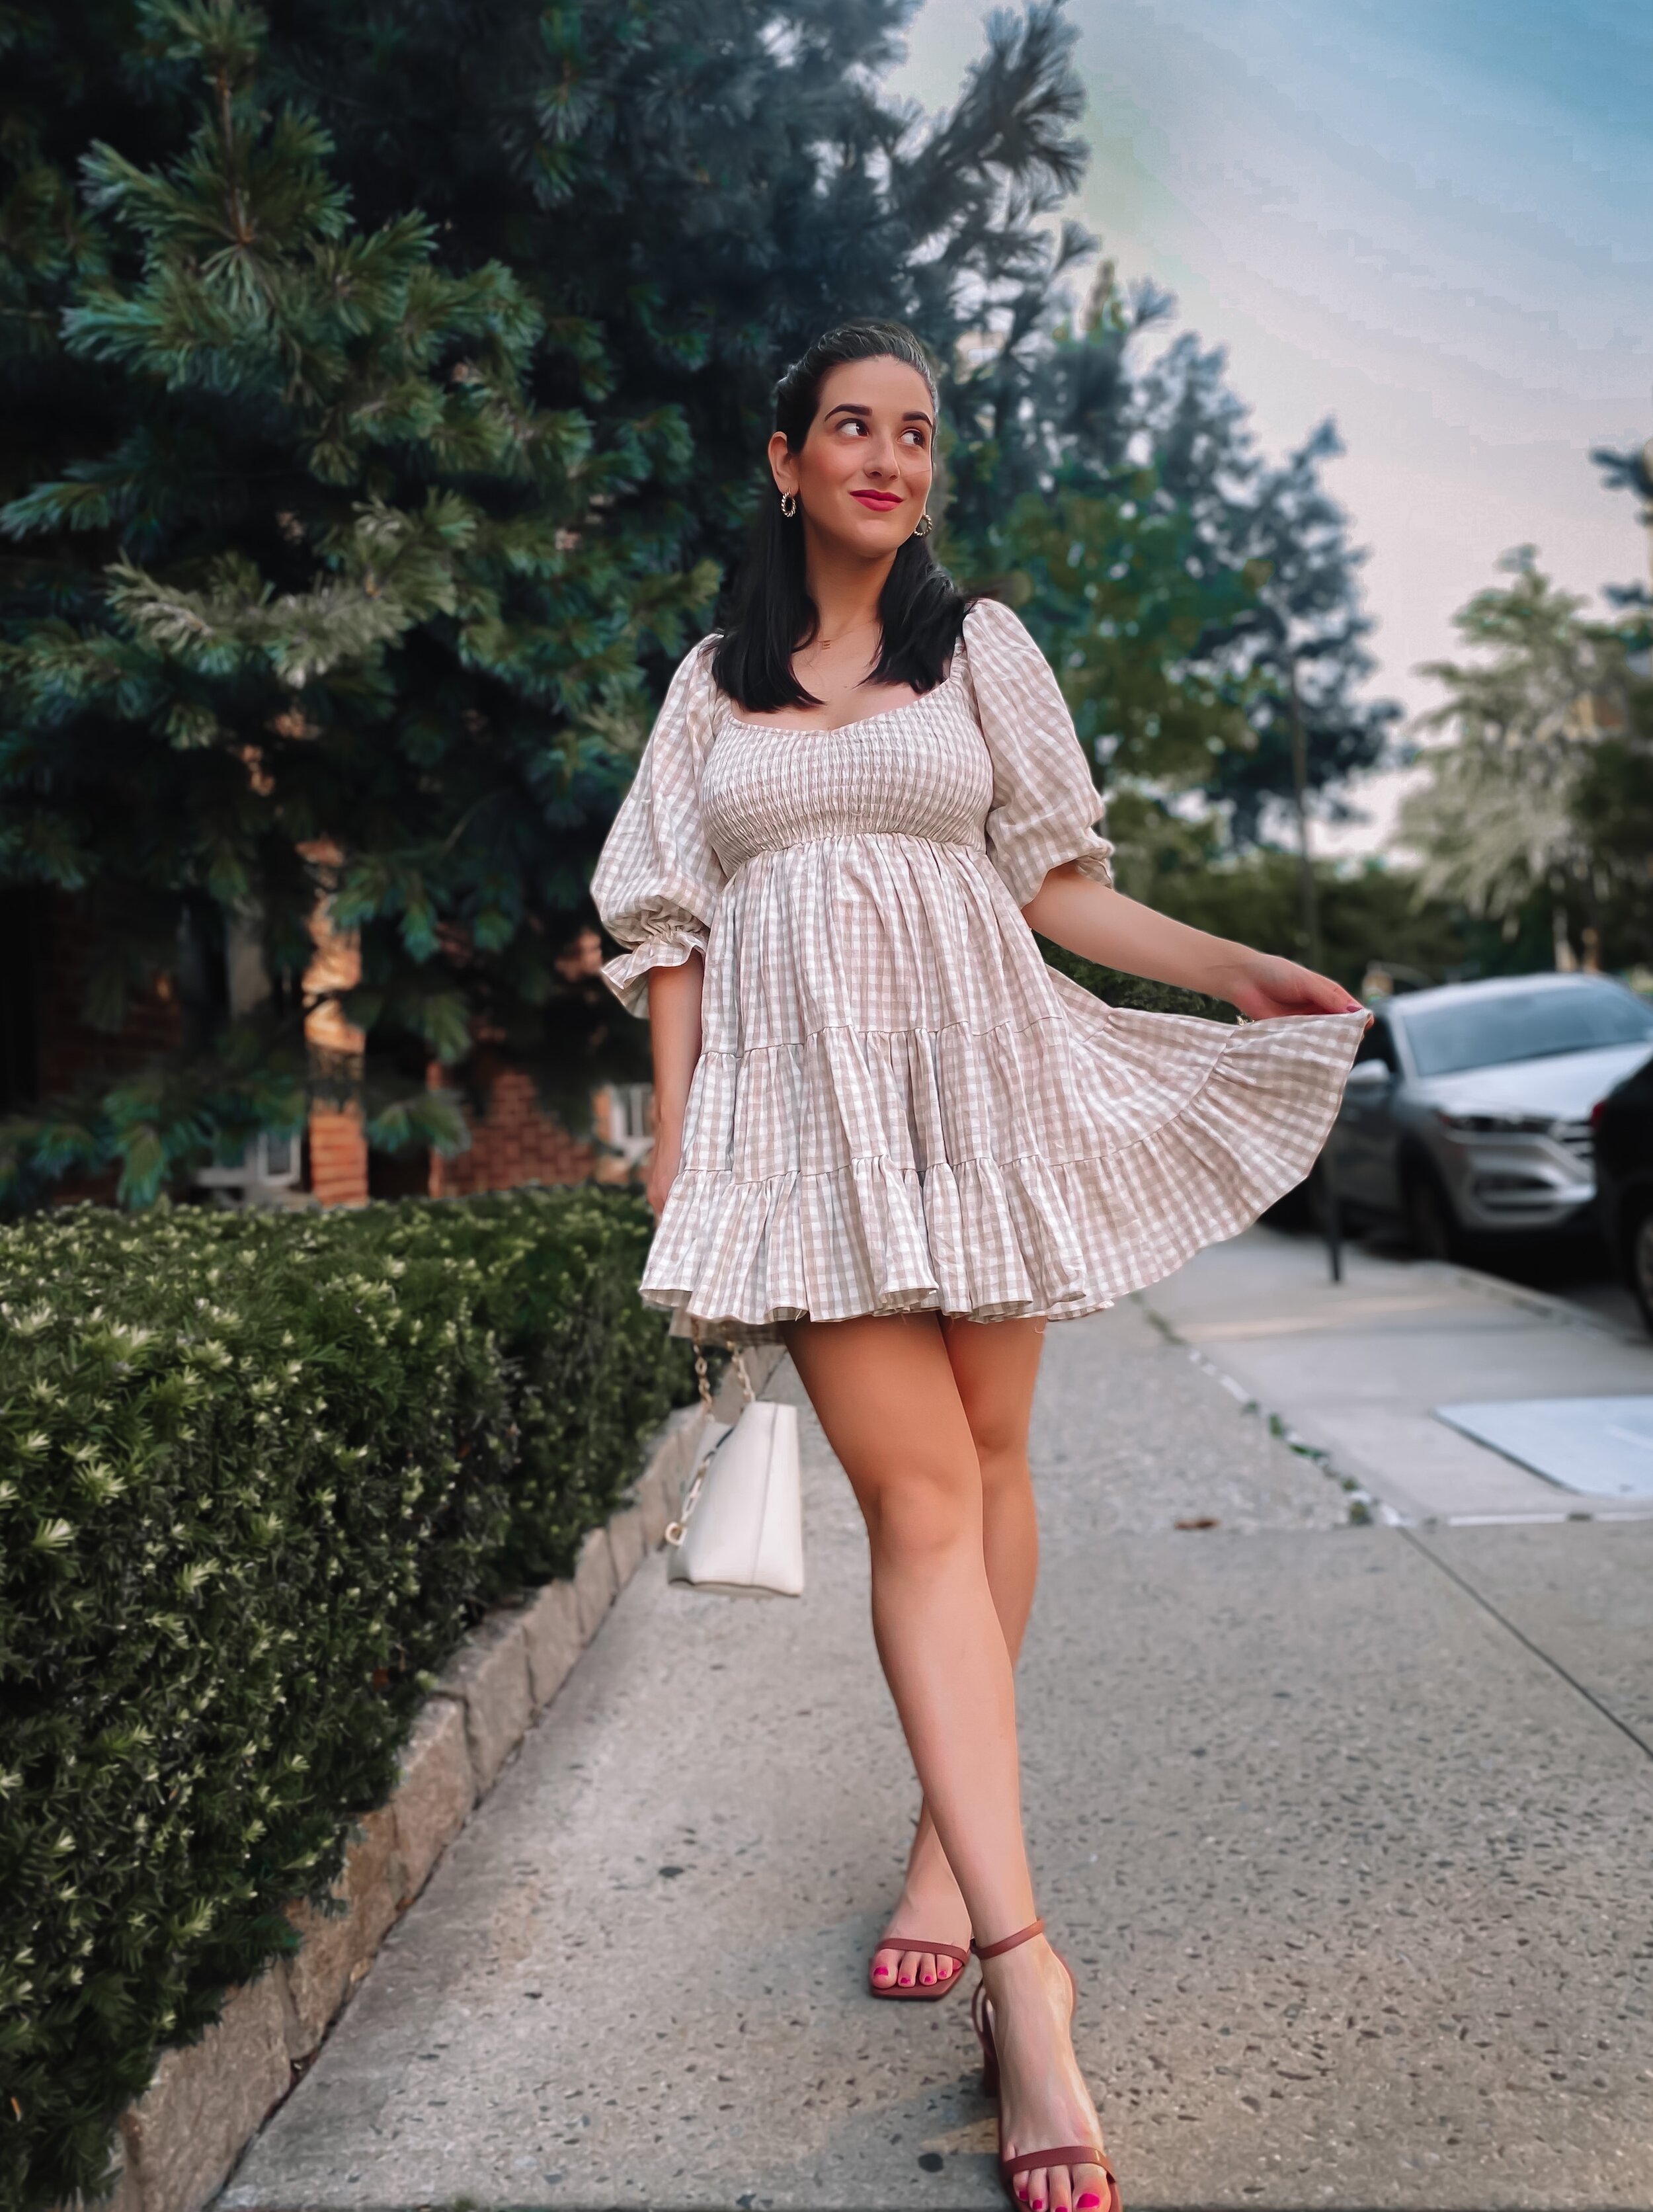 Gingham Puff Sleeve Dress + Tan Sandals Esther Santer NYC Street Style Fashion Blogger Cute Look Shopping Olive & Paix Mini Ruffle Dress Charles Keith Shoes Bag Gold Hoop Earrings Half Ponytail Girl Women Red Lipstick New York City 2021 What To Wear.jpg